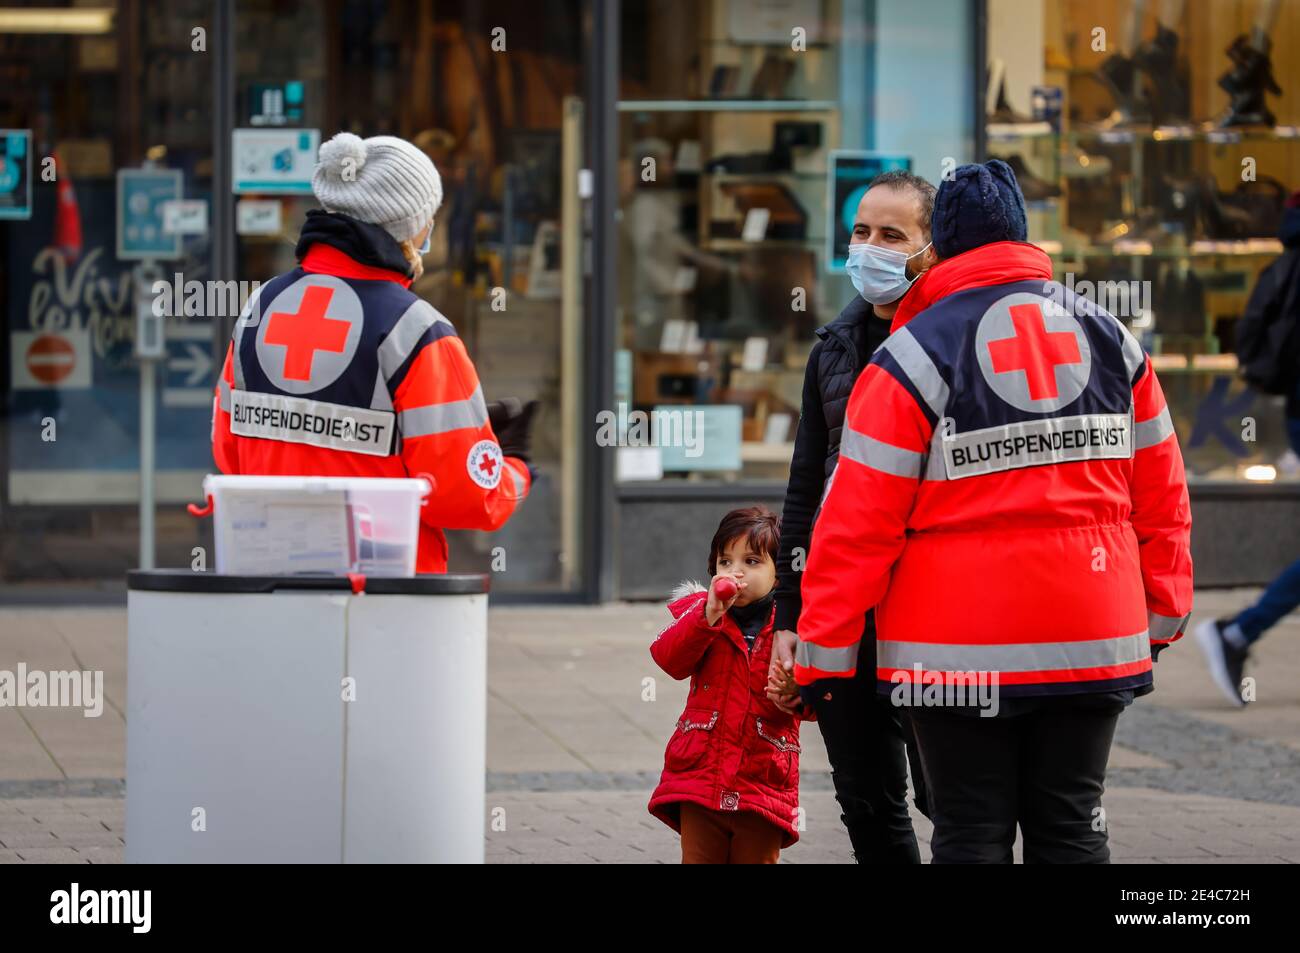 11/21/2020, Essen, North Rhine-Westphalia, Germany - Employees from the DRK Blood Donation Service West stand at an information stand in the pedestrian zone and advertise to passers-by for blood donation in times of the corona crisis, German Red Cross, in times of the flu and the coronavirus, the hospitals are particularly dependent on blood donations and blood plasma donations. Stock Photo